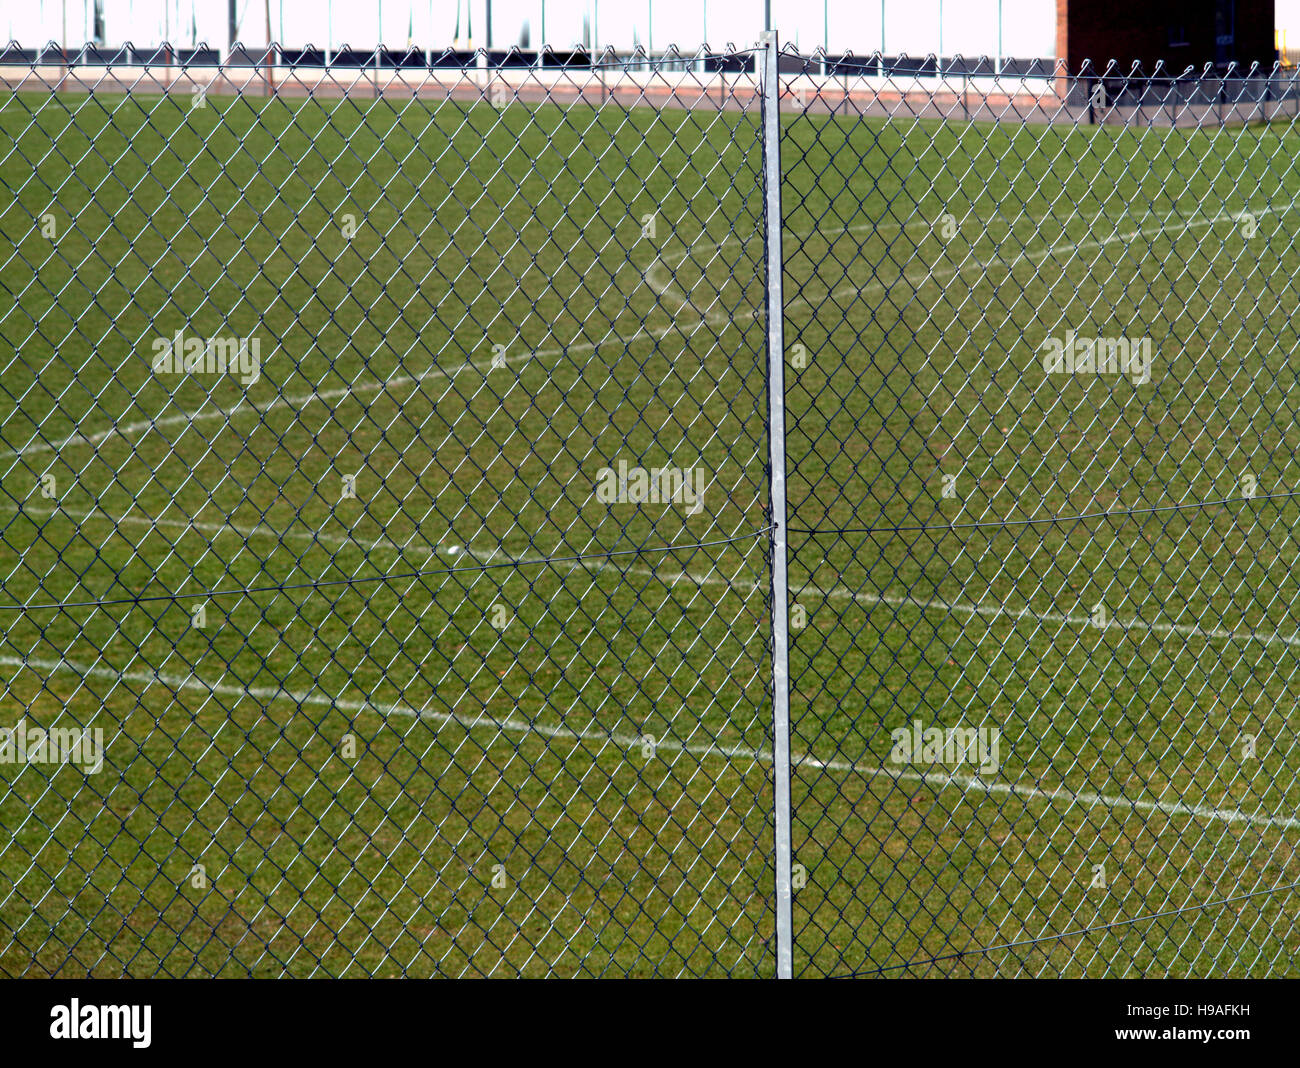 school football soccer  pitch shot through wire cage Stock Photo